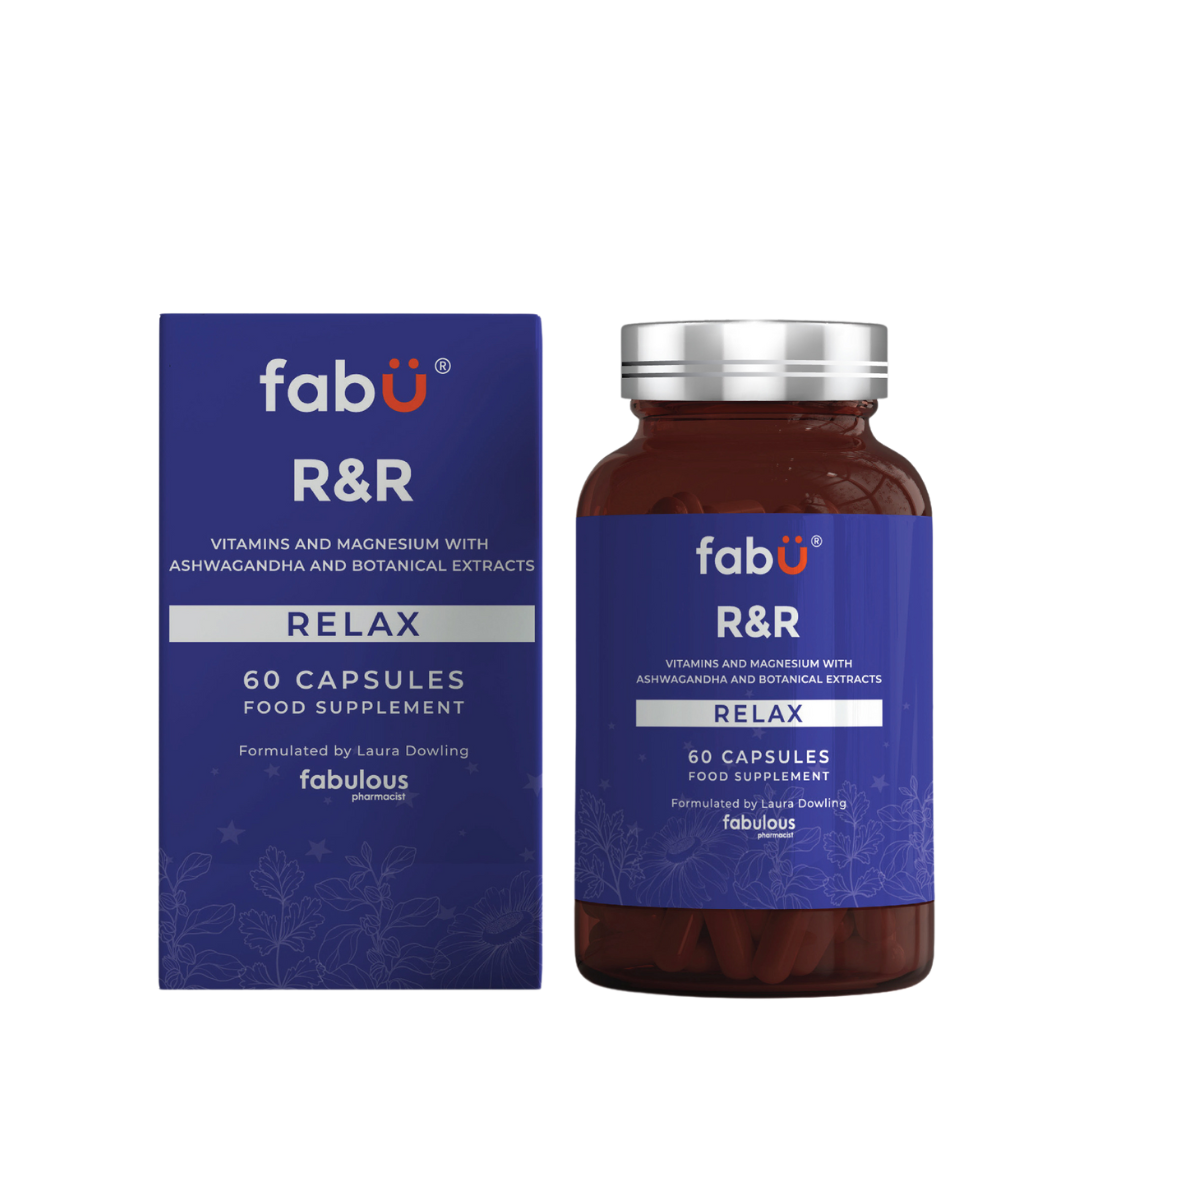 fabU R&R Relax Food Supplement 60 Capsules